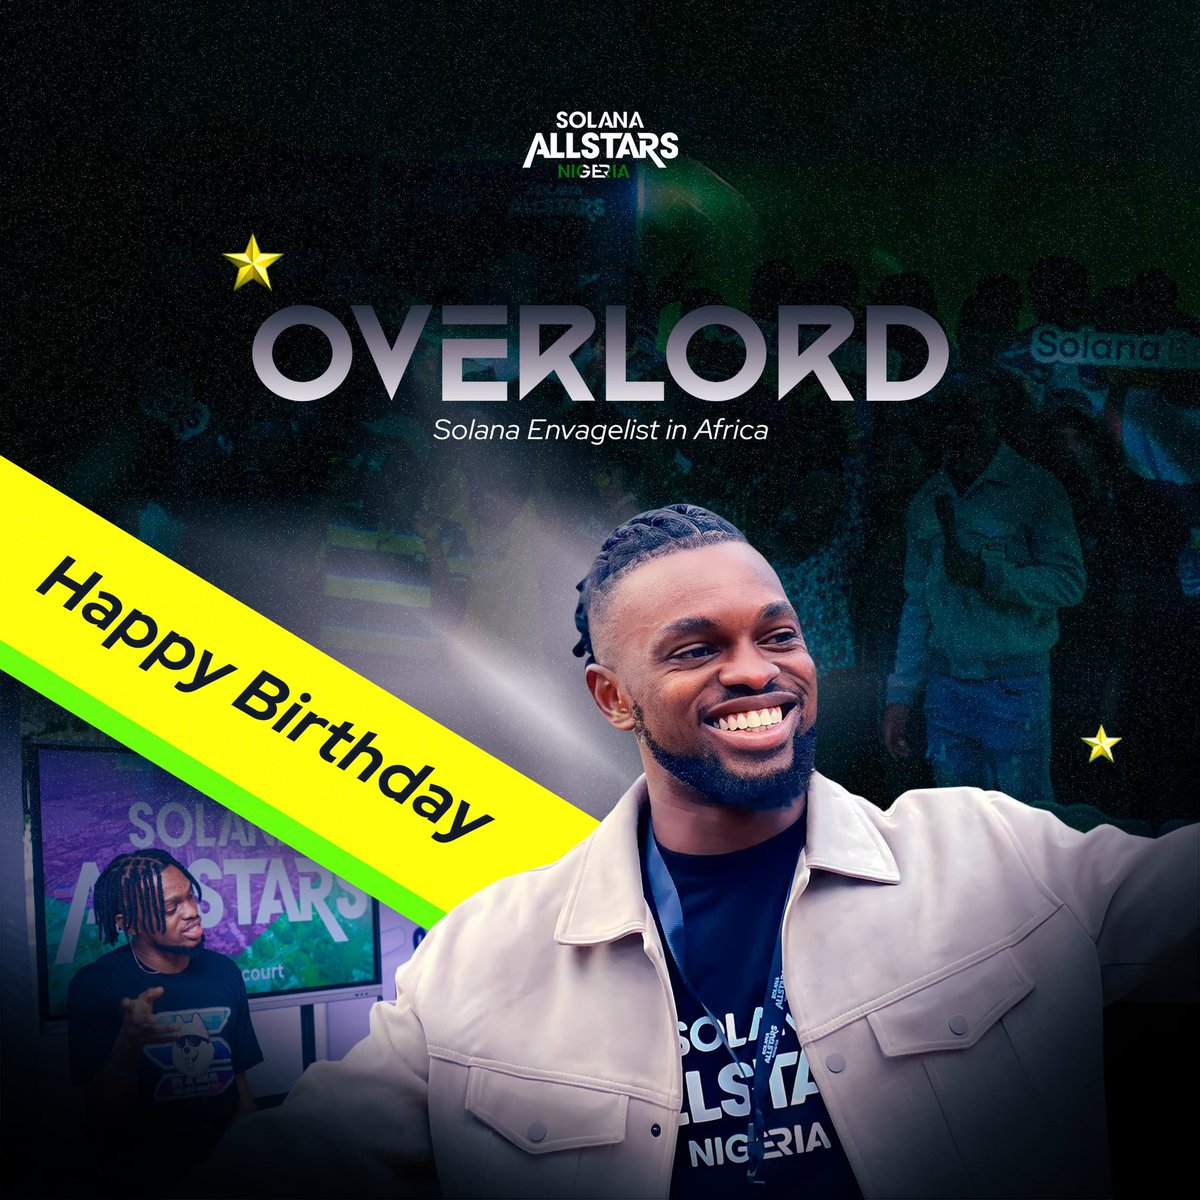 Hey @solana 🇳🇬 family! Today, we celebrate our CM @ViktorSimdope and wish him a Happy Birthday 🎉🎉 His commitment and dedication to scaling Crypto adoption across the continent is second to none. Thank you for your huge heart and contribution to the @AllstarsNG family. We